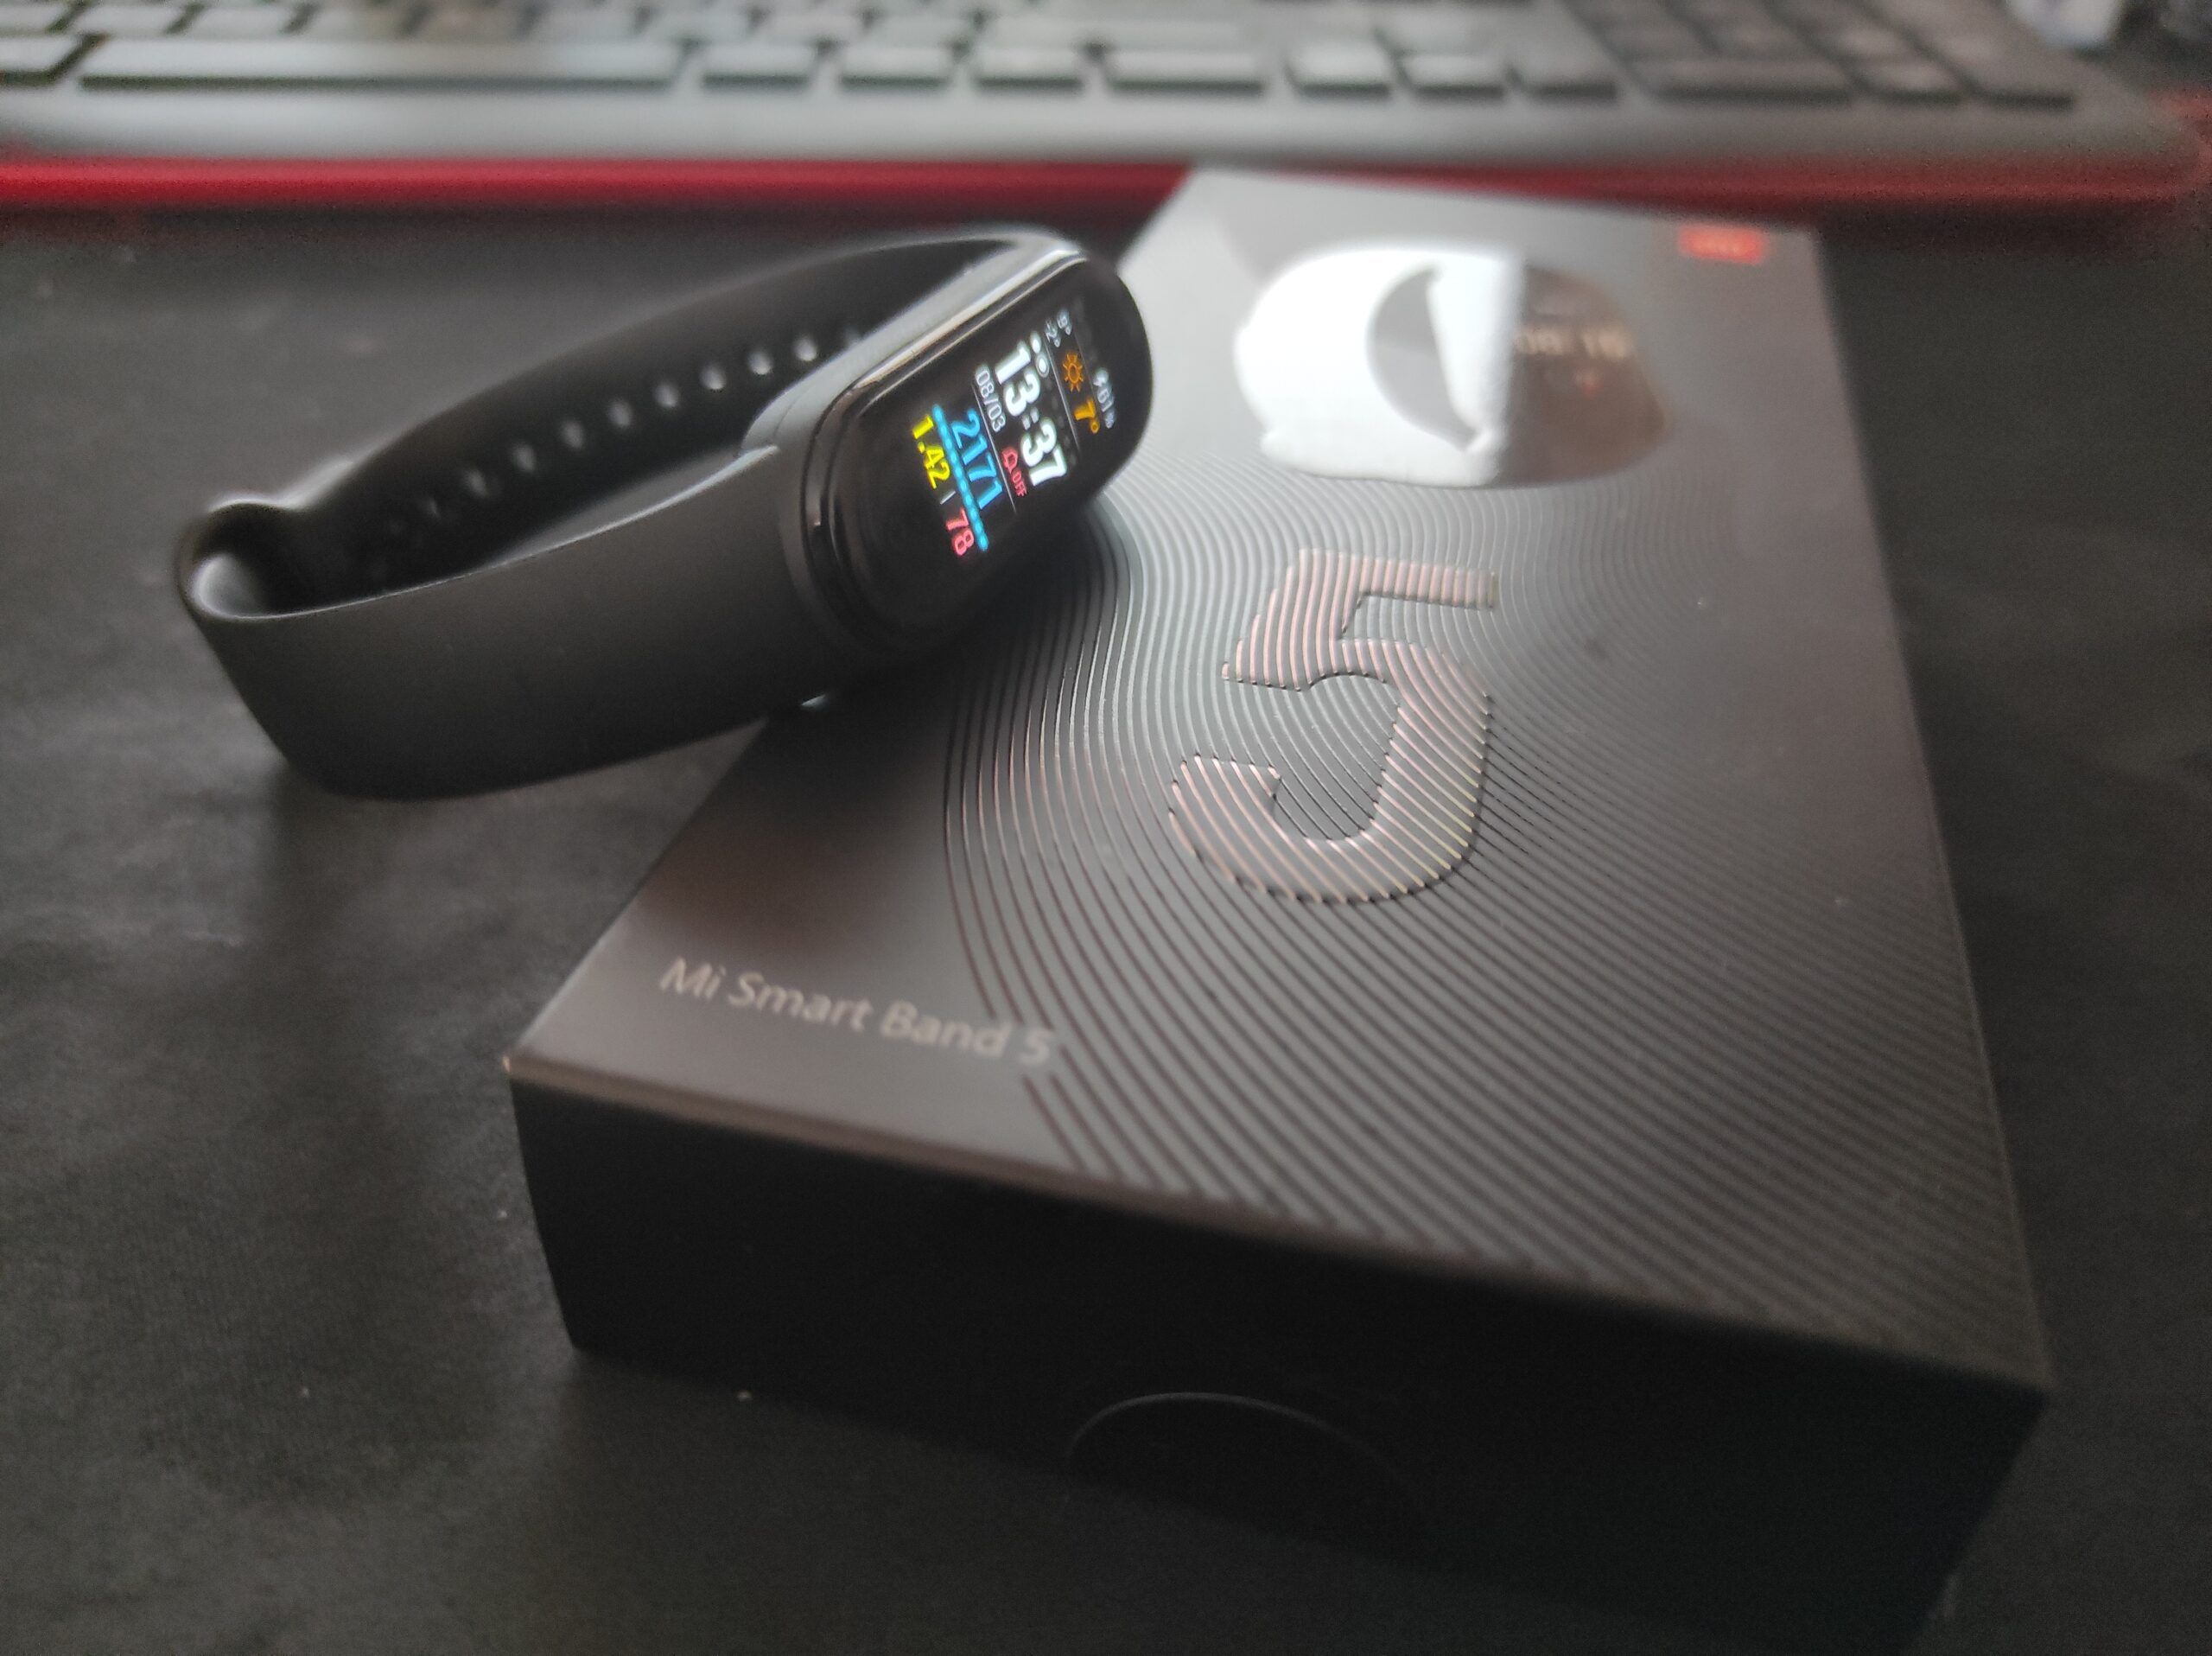 One year later – Review of Xiaomi Mi Band 5